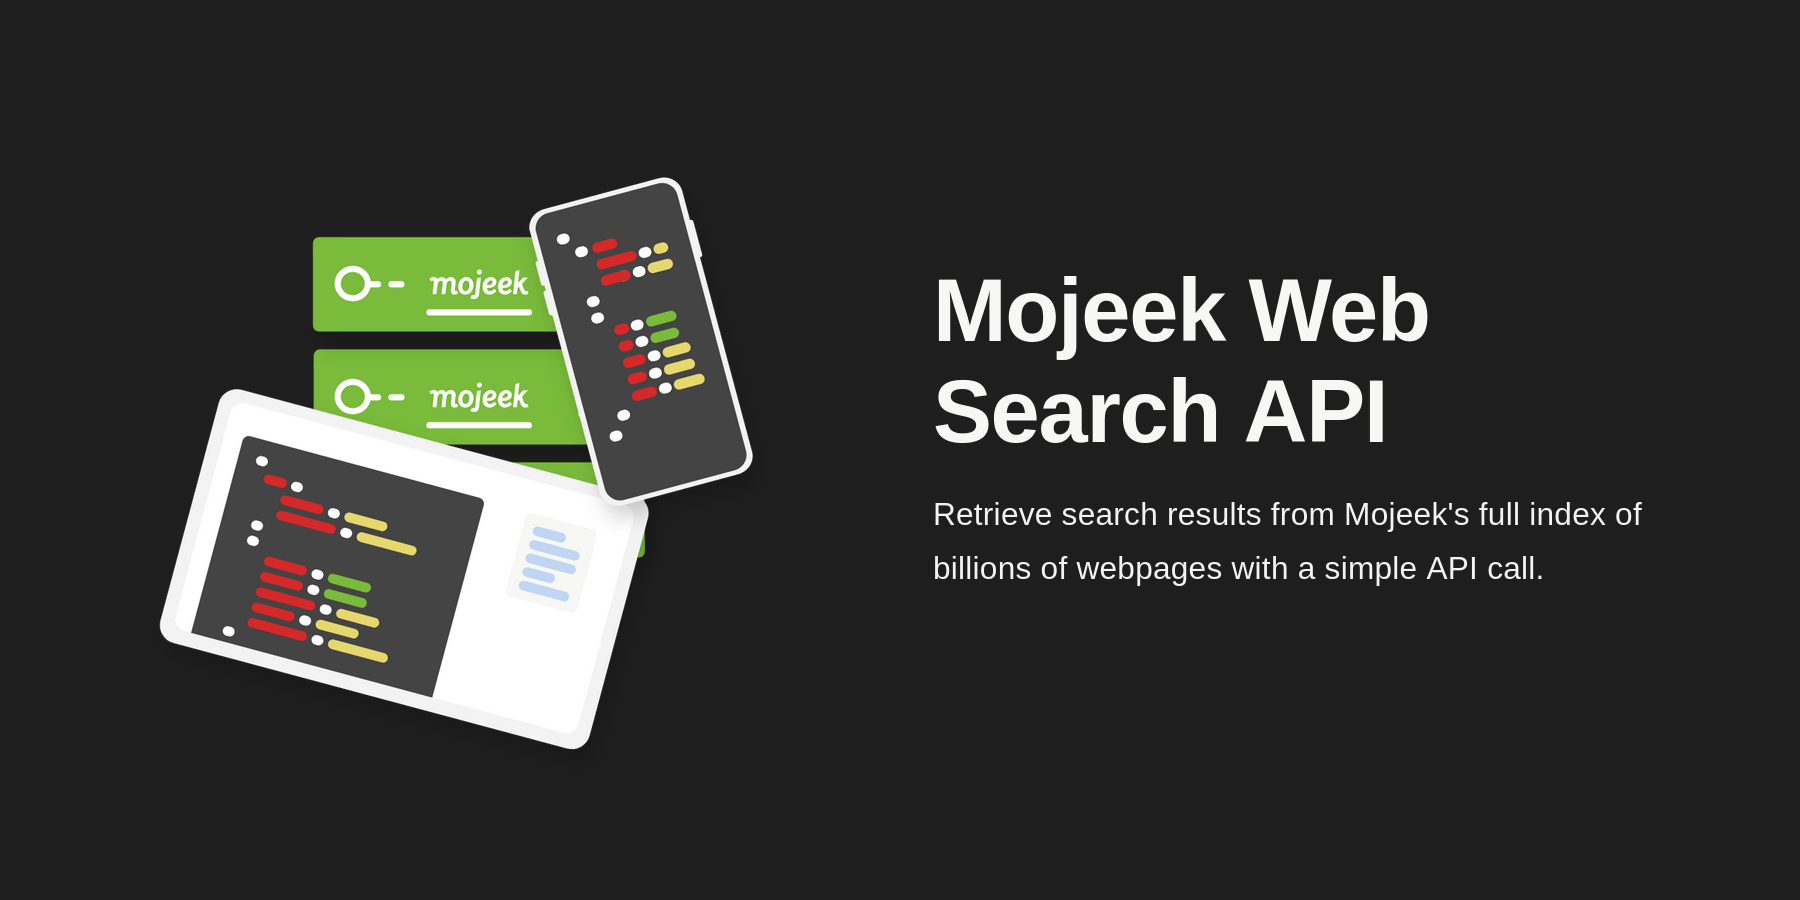 a shot of the top of the Mojeek Web Search API landing page